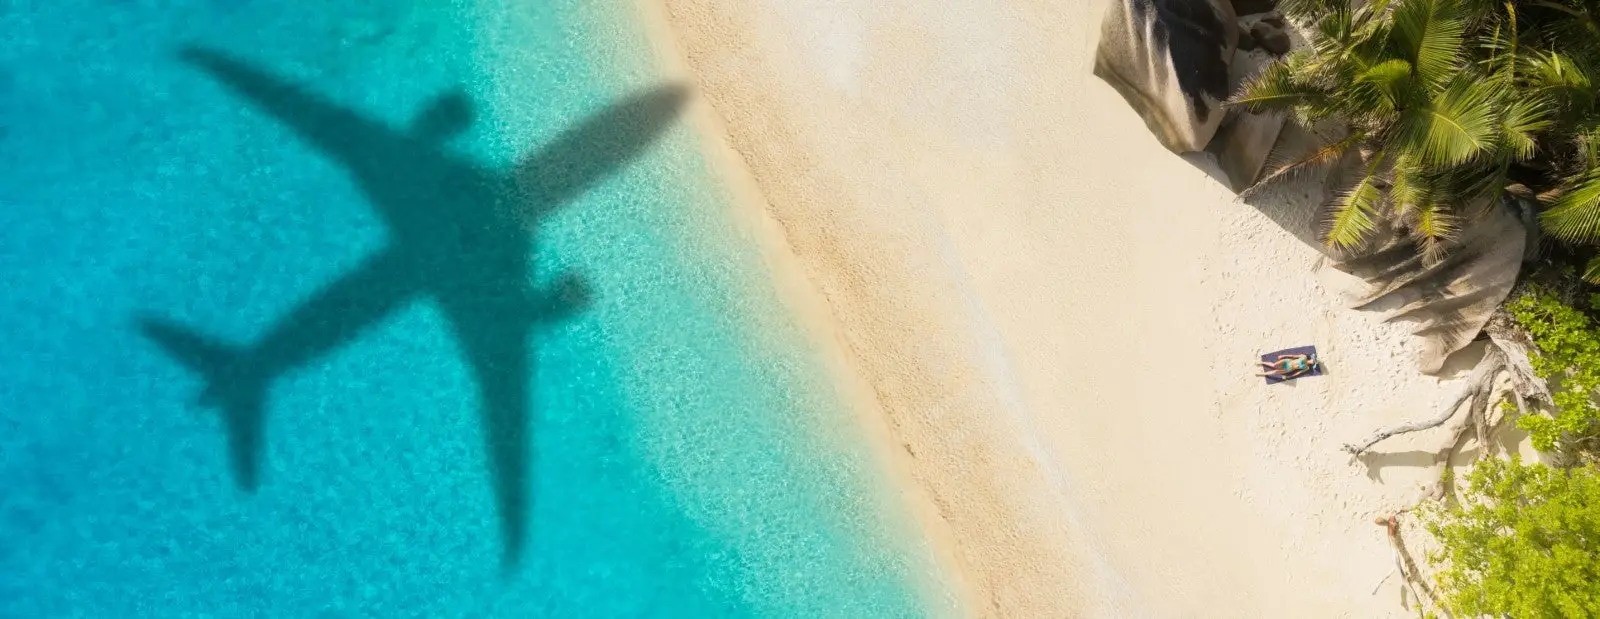 Shadow of a plane flying overhead on a beach with turquoise water. 